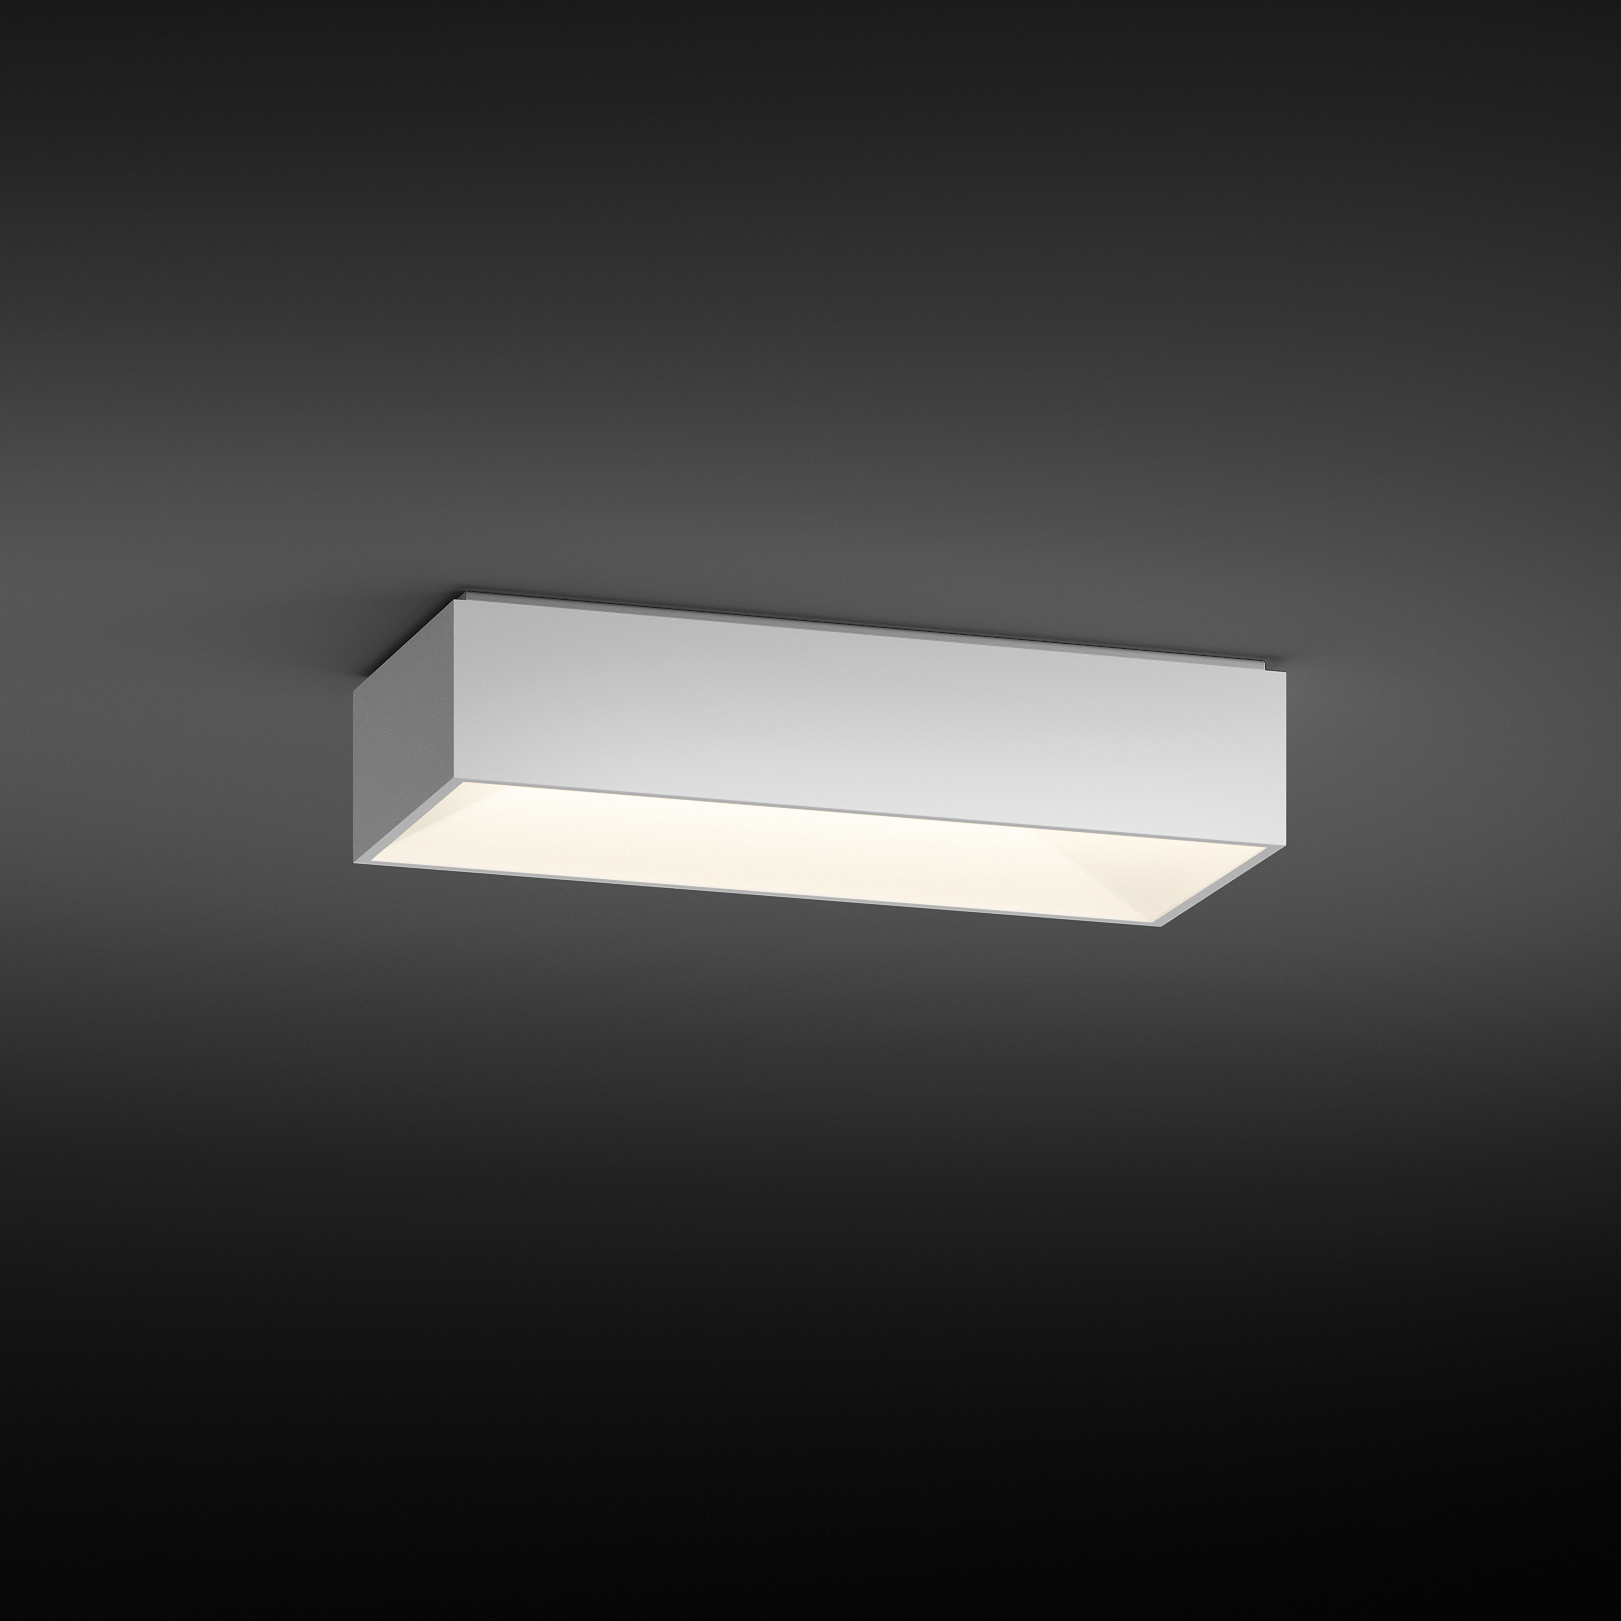 Link Rectangle Ceiling Light Fixture By Vibia 5373 03